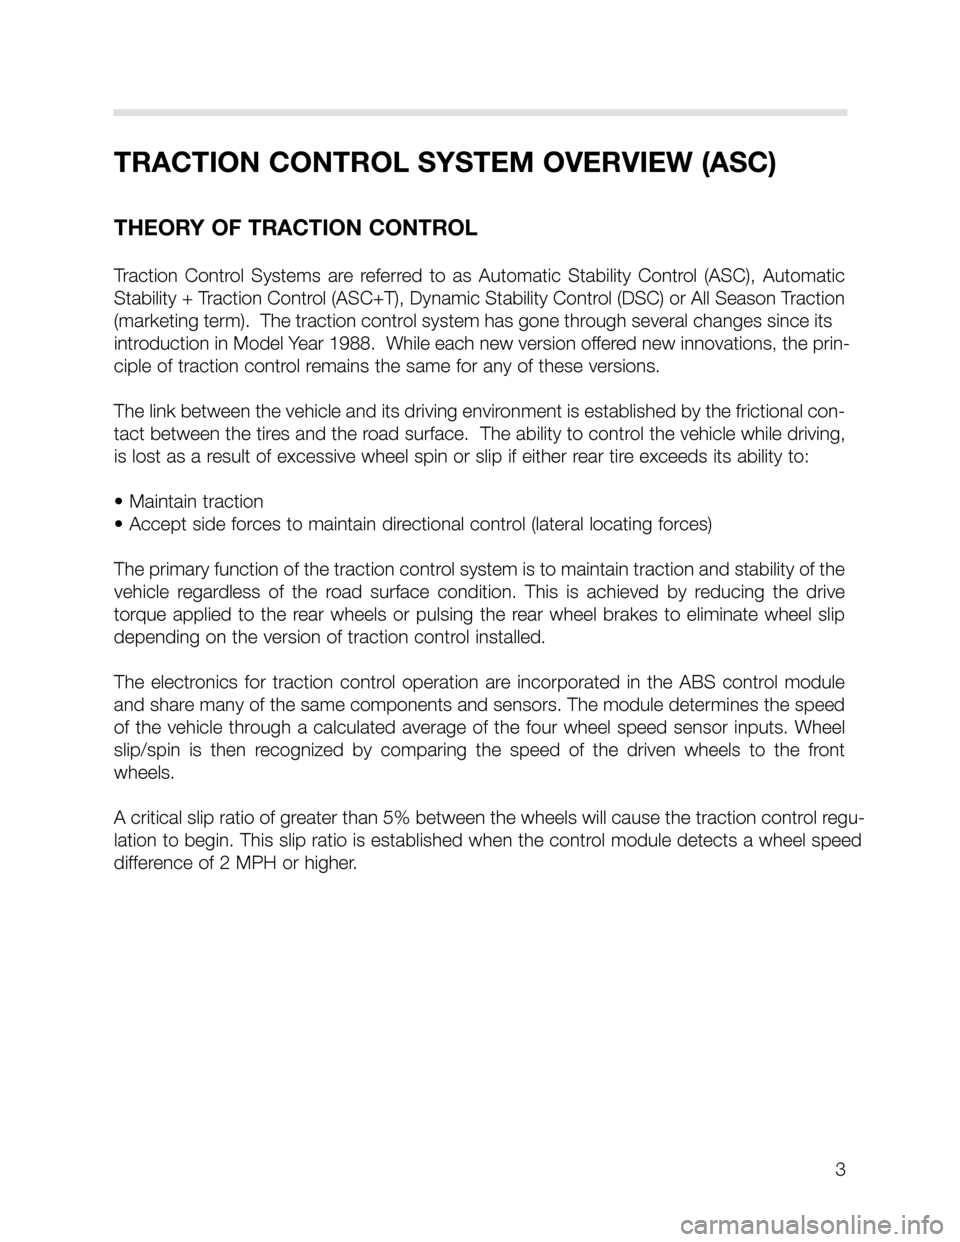 BMW X5 2003 E53 DSC System Workshop Manual 3
TRACTION CONTROL SYSTEM OVERVIEW (ASC)
THEORY OF TRACTION CONTROL
Traction  Control  Systems  are  referred  to  as  Automatic  Stability  Control  (ASC),  Automatic
Stability + Traction Control (AS